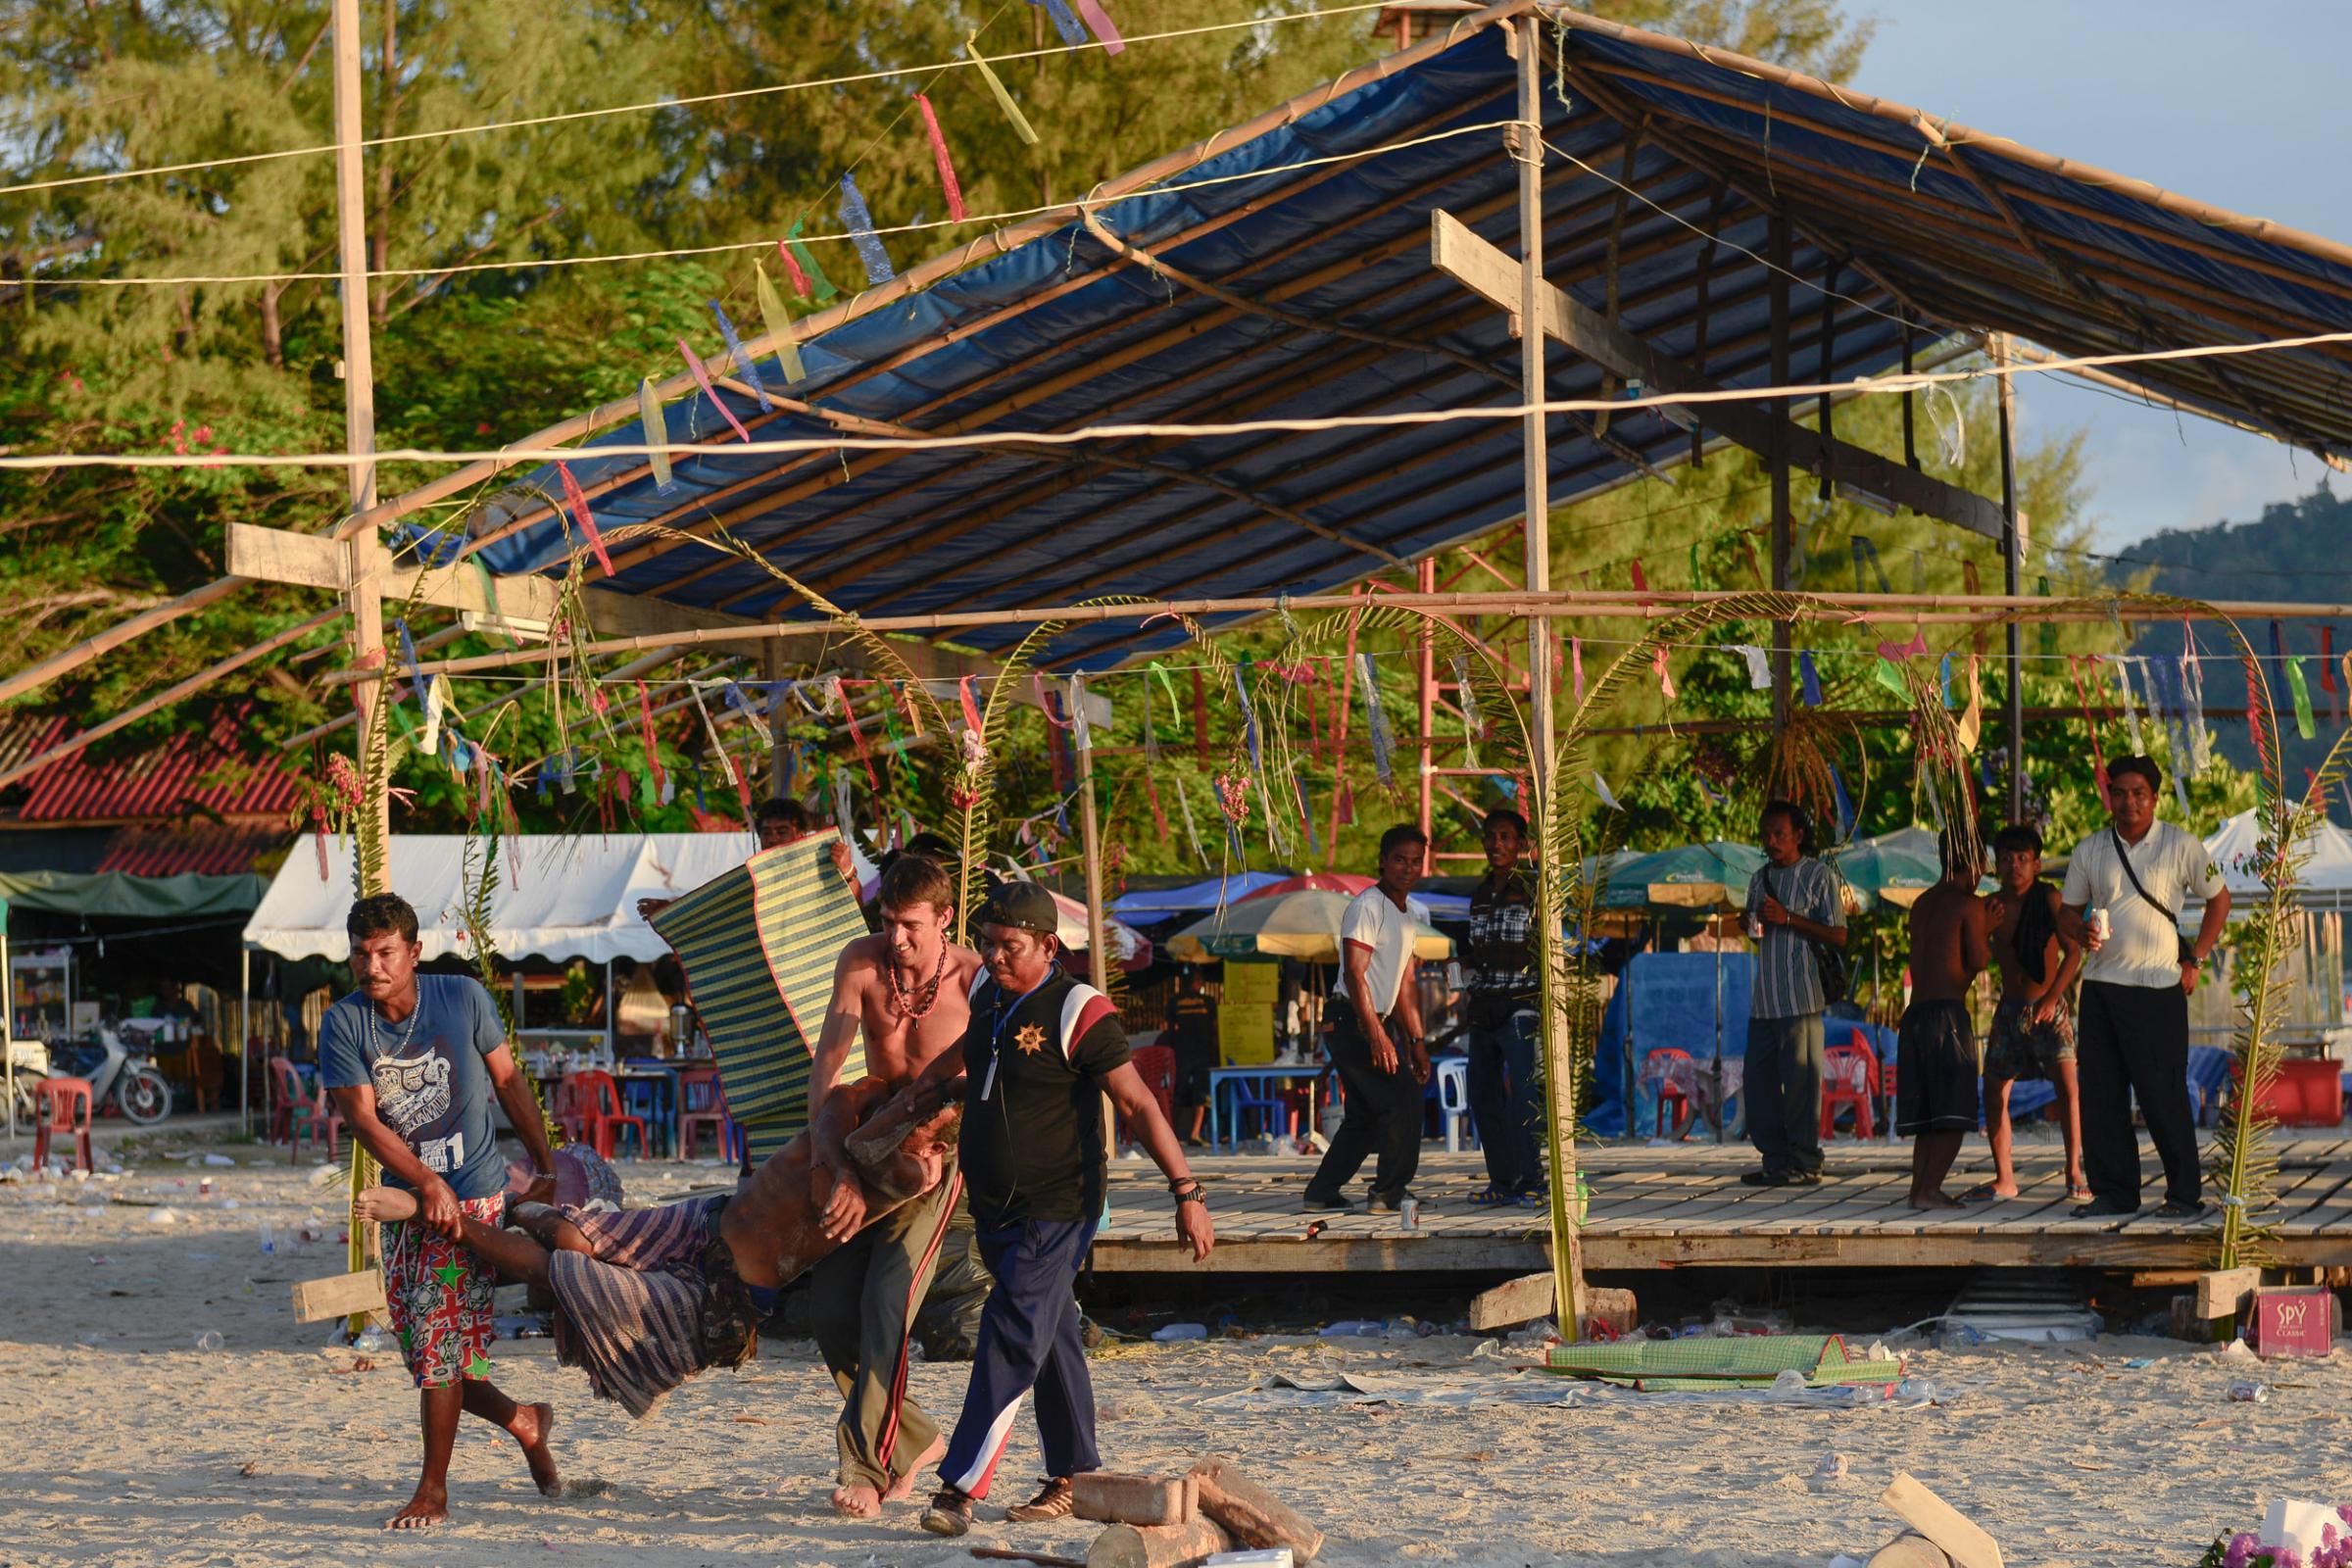 Lipe Island - In the morning, the sea gypsies and a tourist help carry...